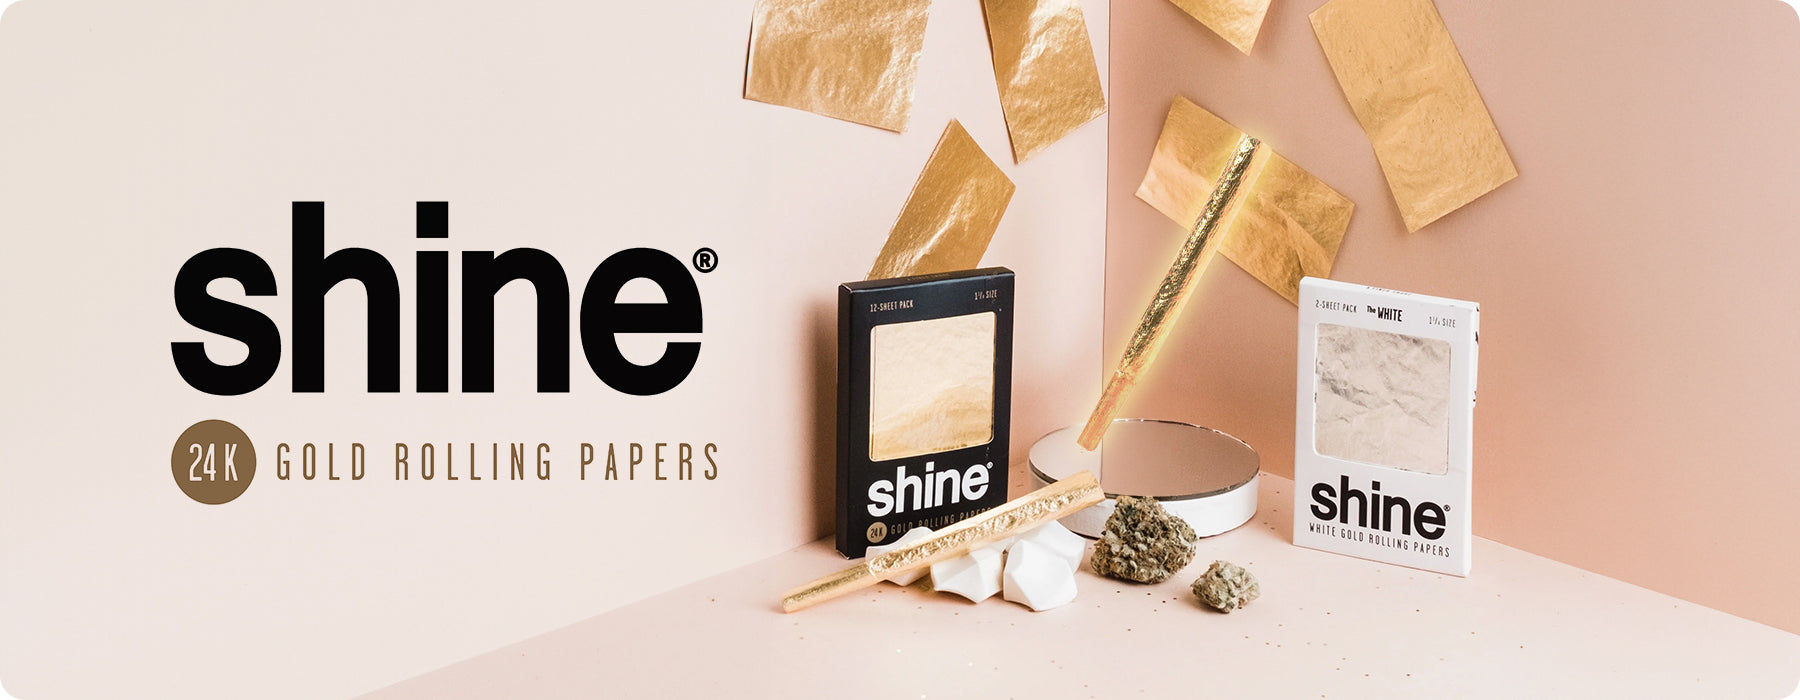 onewholesale.ca shine gold rolling paper main banner